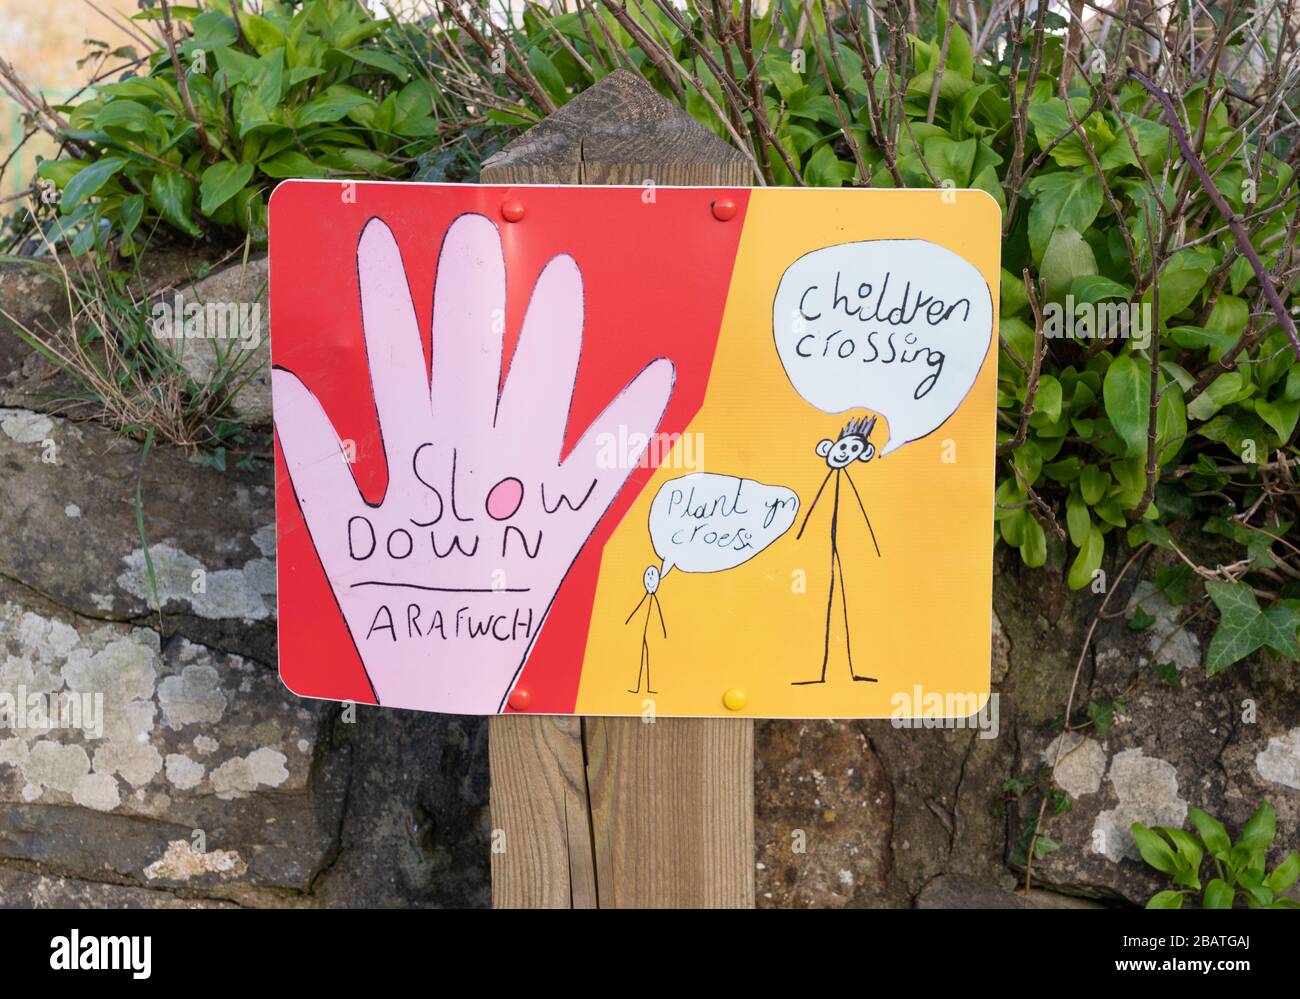 A hand drawn sign outside a school advising in English and Welsh to slow down with children crossing. Newport, Pembrokeshire. Wales. UK Stock Photo